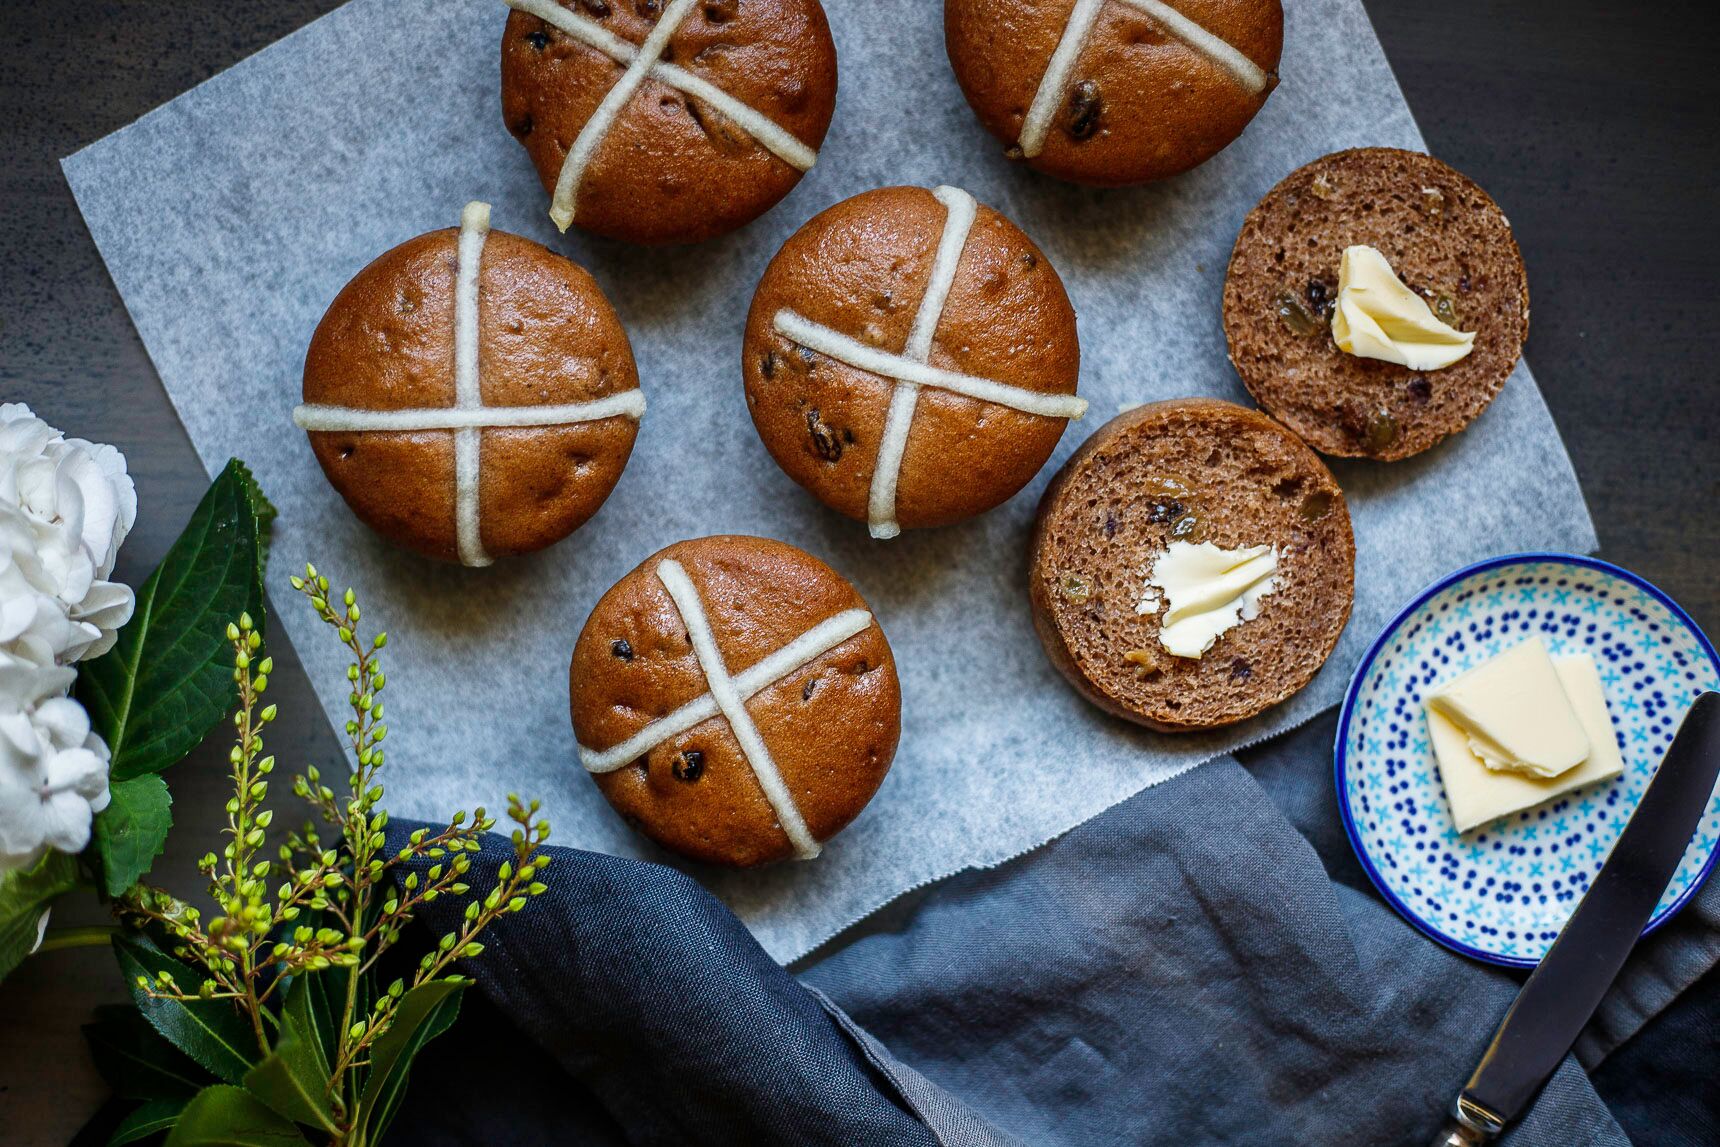 5 things you didn’t know about hot cross buns